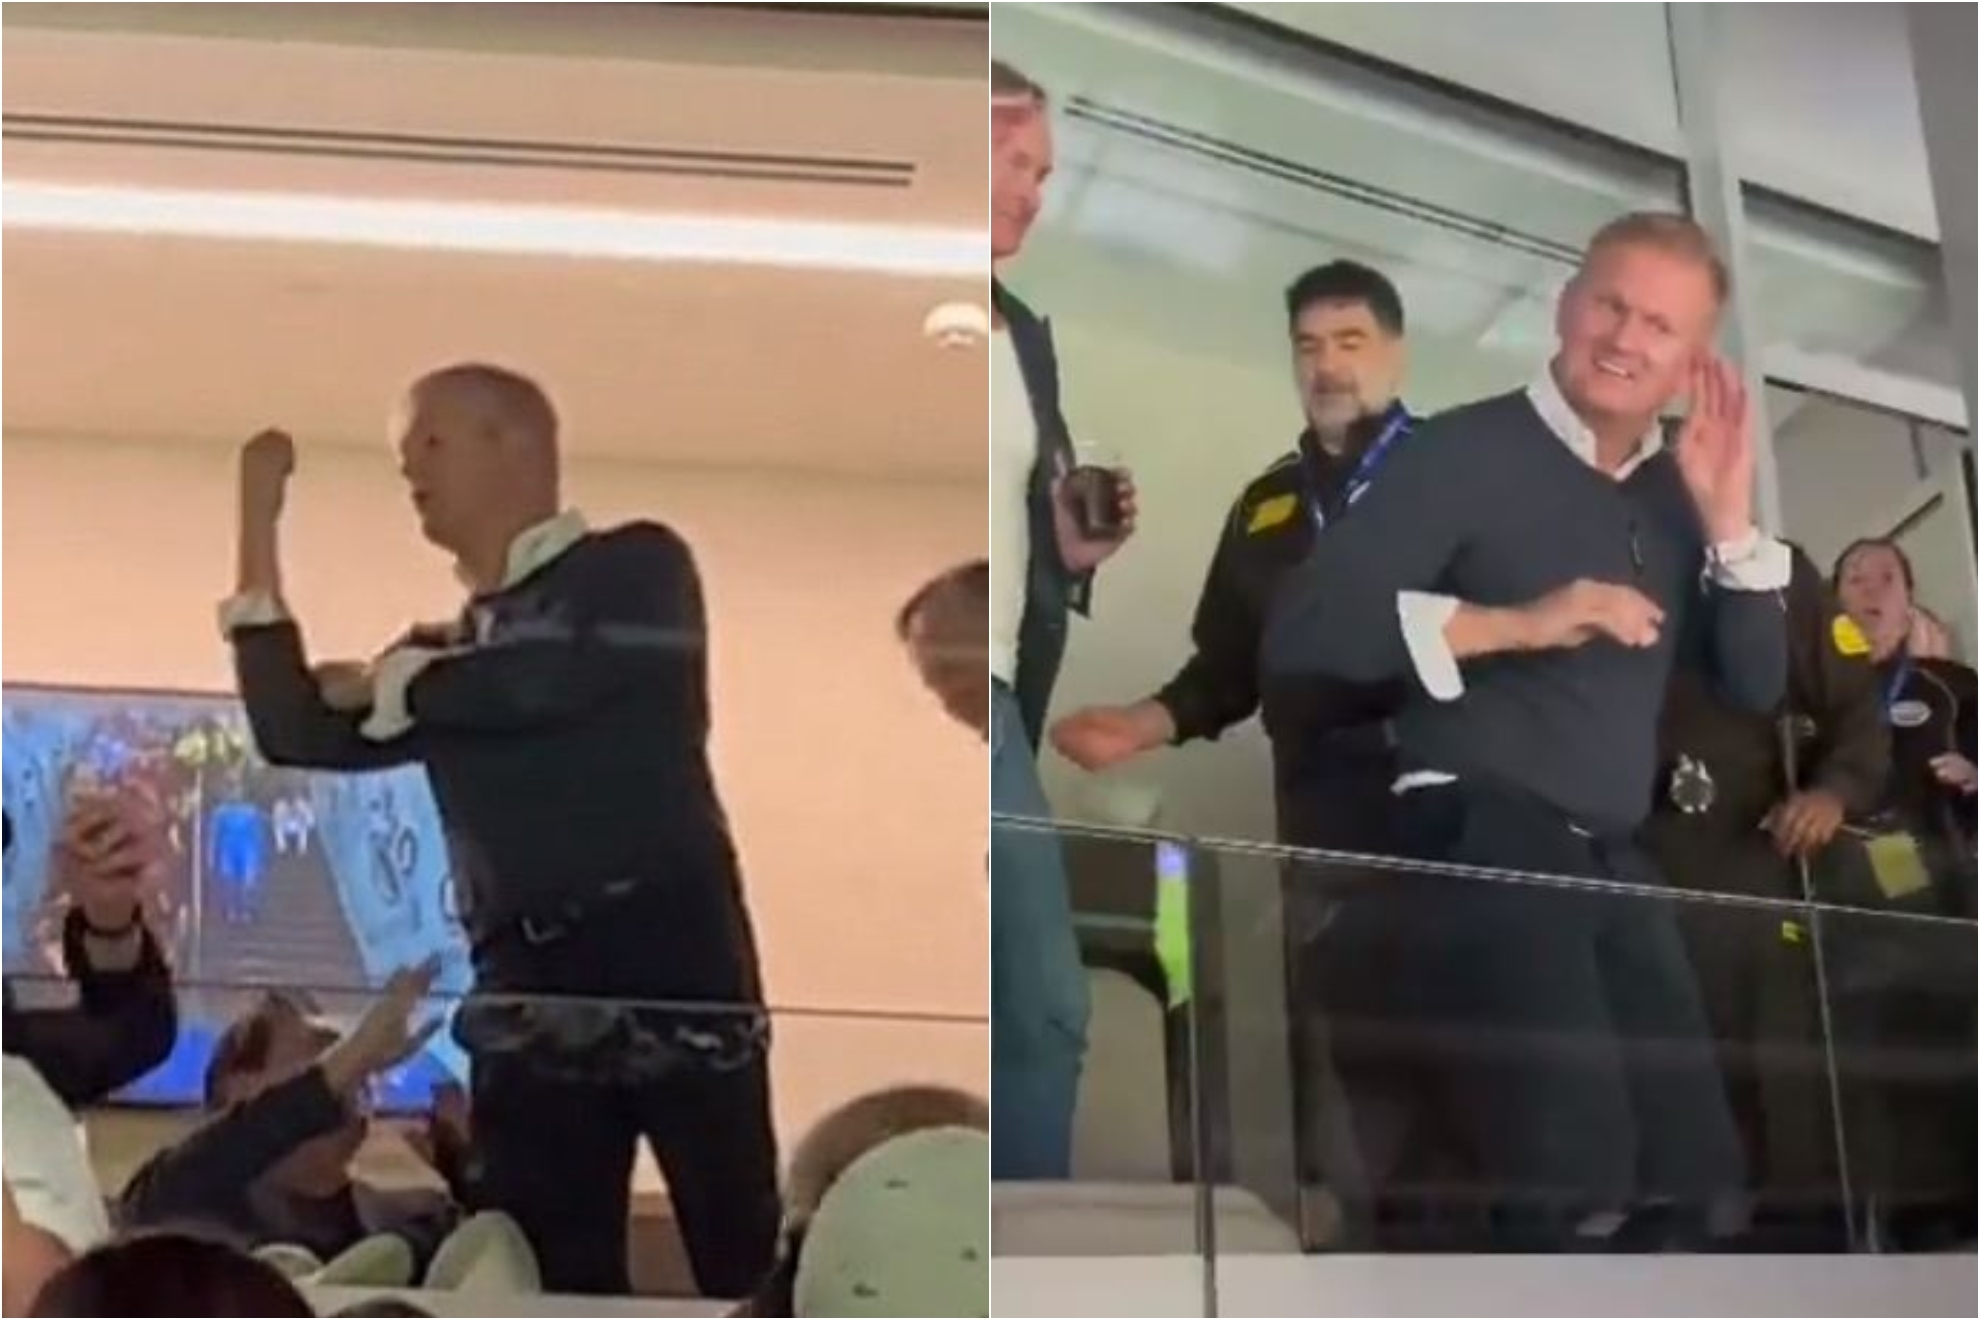 Haaland's father causes a scene at the Bernabeu: Makes rude gestures to fans and is escorted from his VIP seat